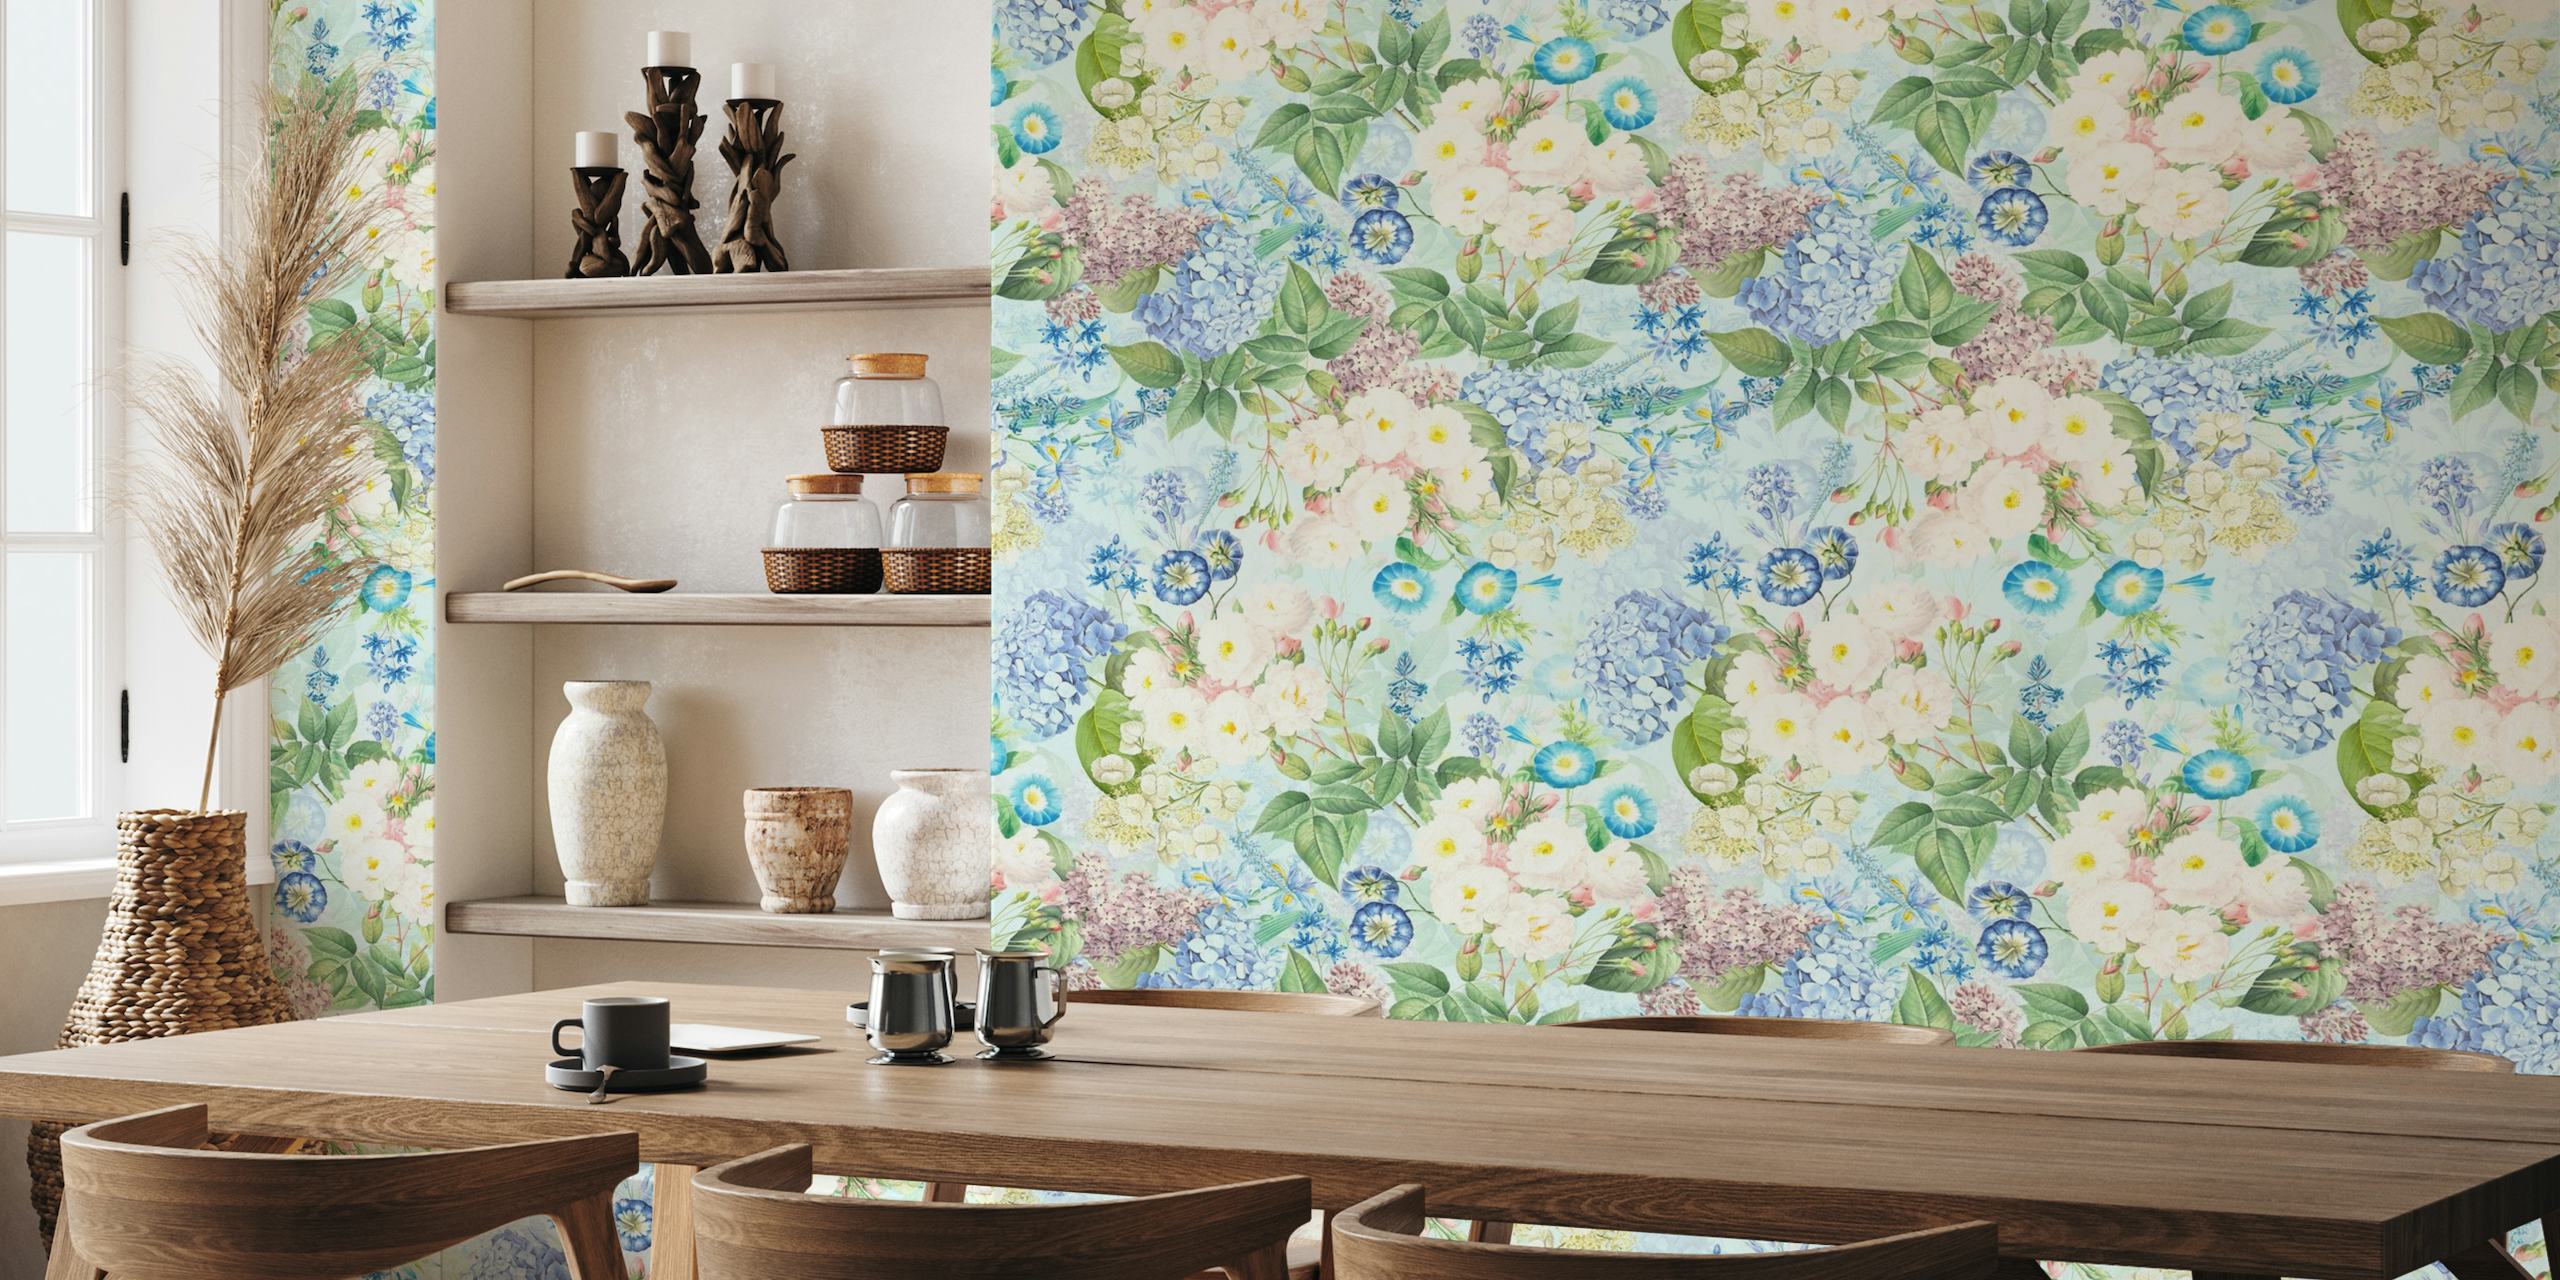 Blue vintage rose garden wall mural with blooming flowers and lush greenery